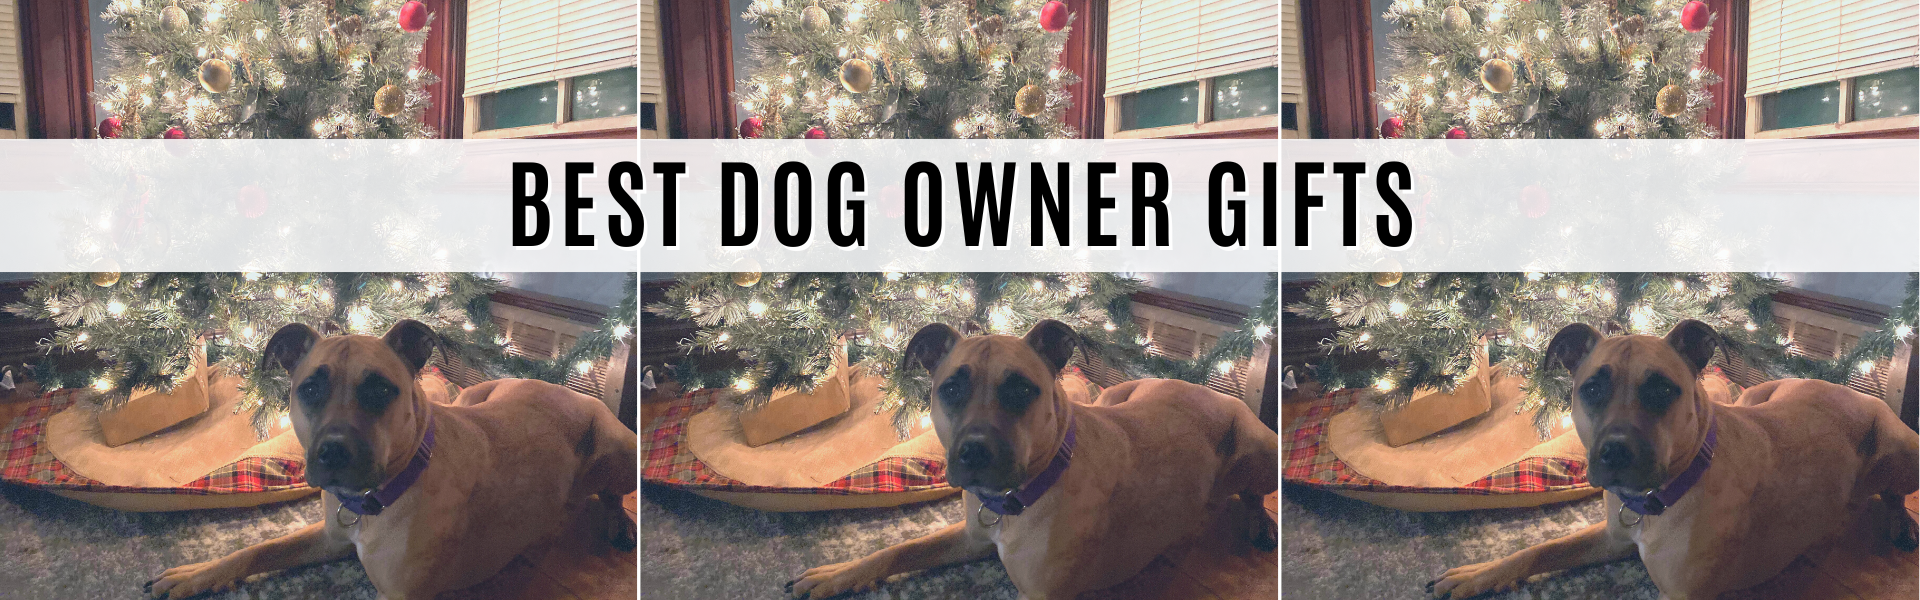 best dog owner gifts